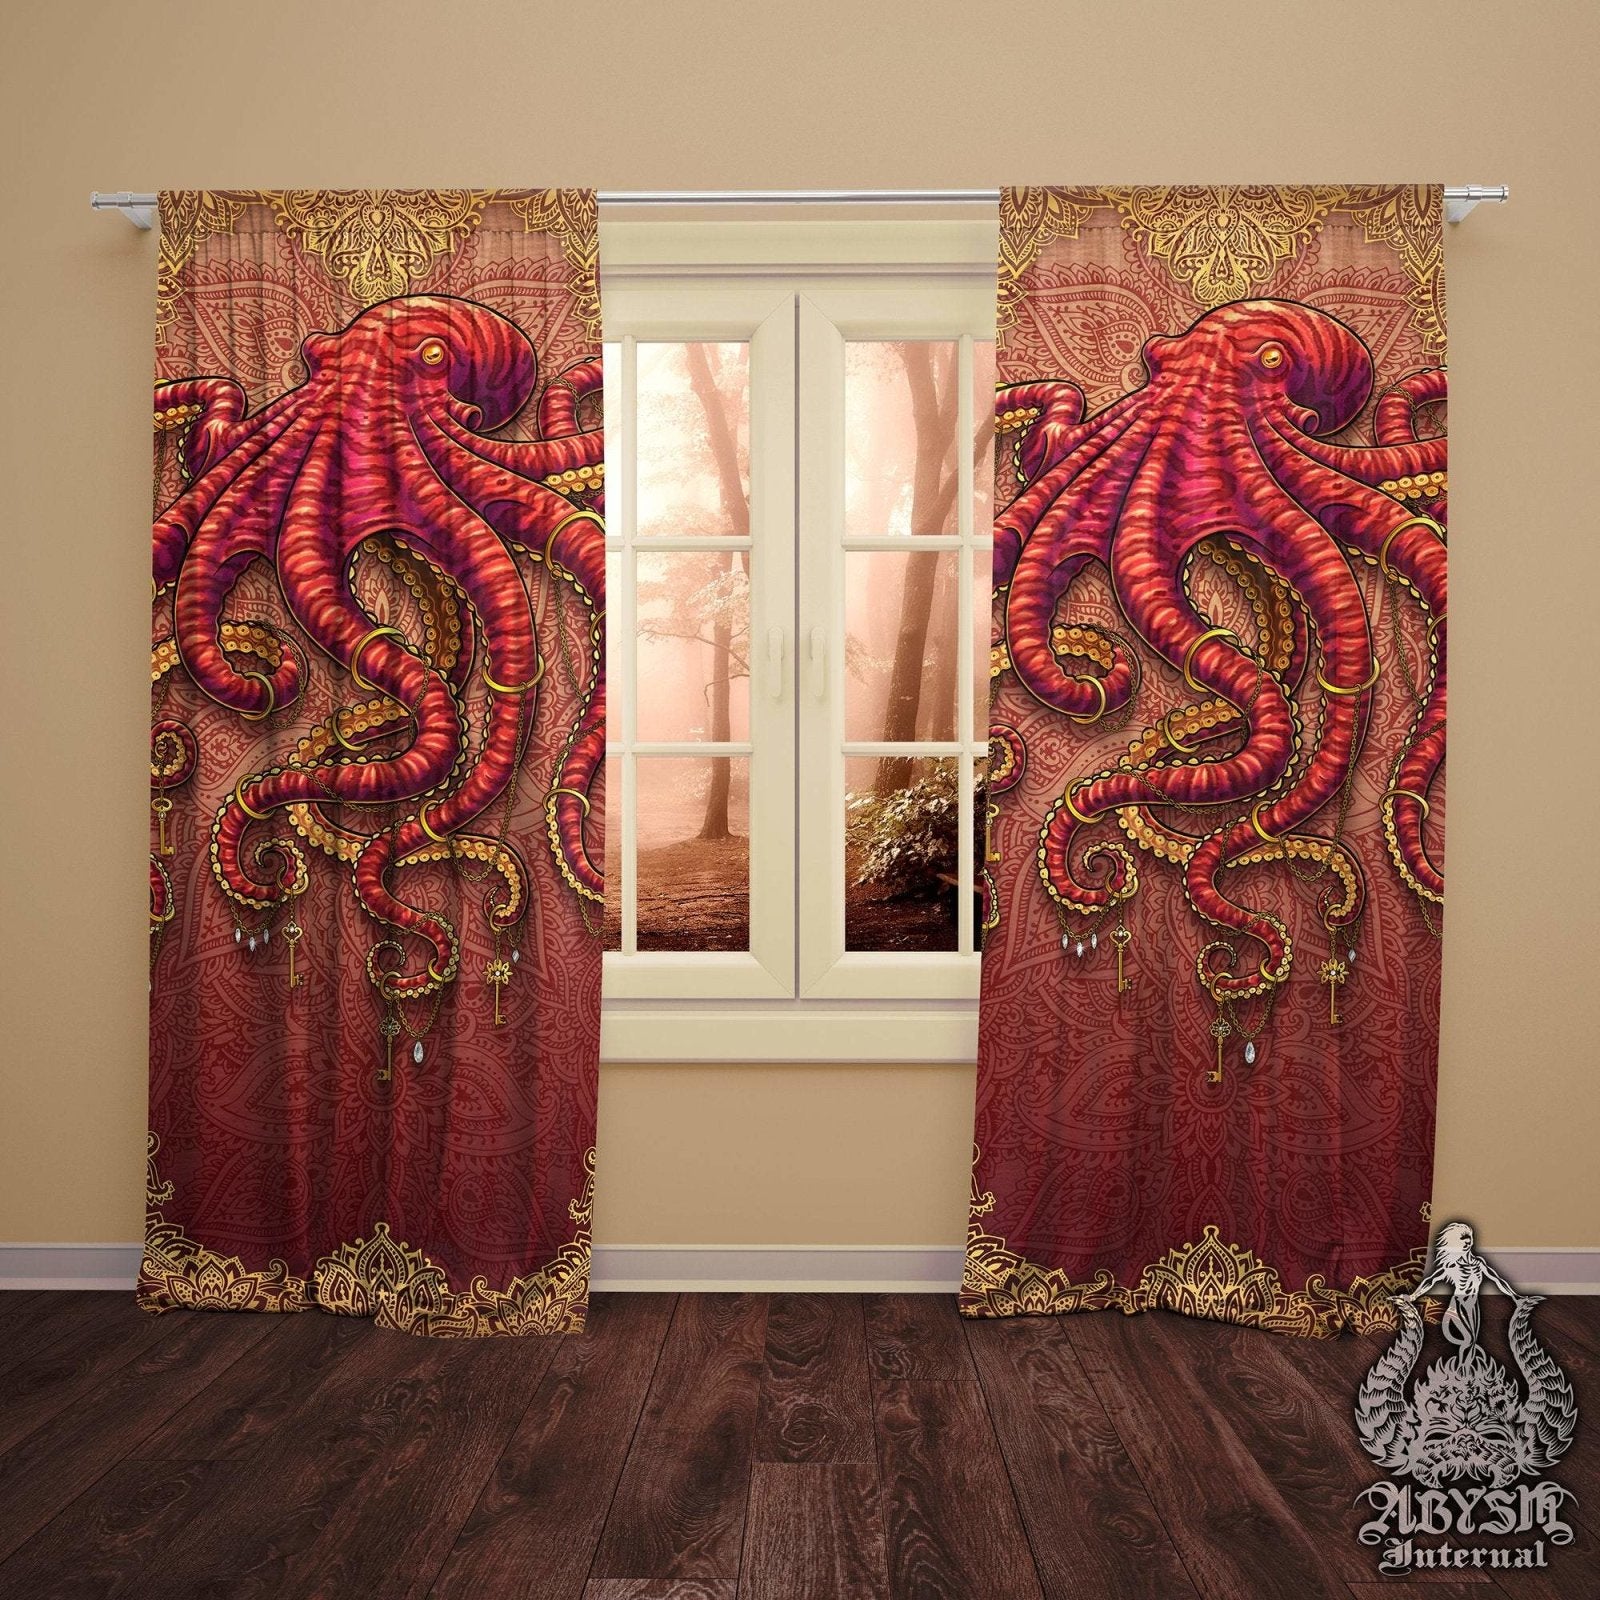 Bohemian Blackout Curtains, Long Window Panels, Hippie Beach House, Indie and Boho Room Decor, Art Print, Funky and Eclectic Home Decor - Octopus, Mandalas - Abysm Internal